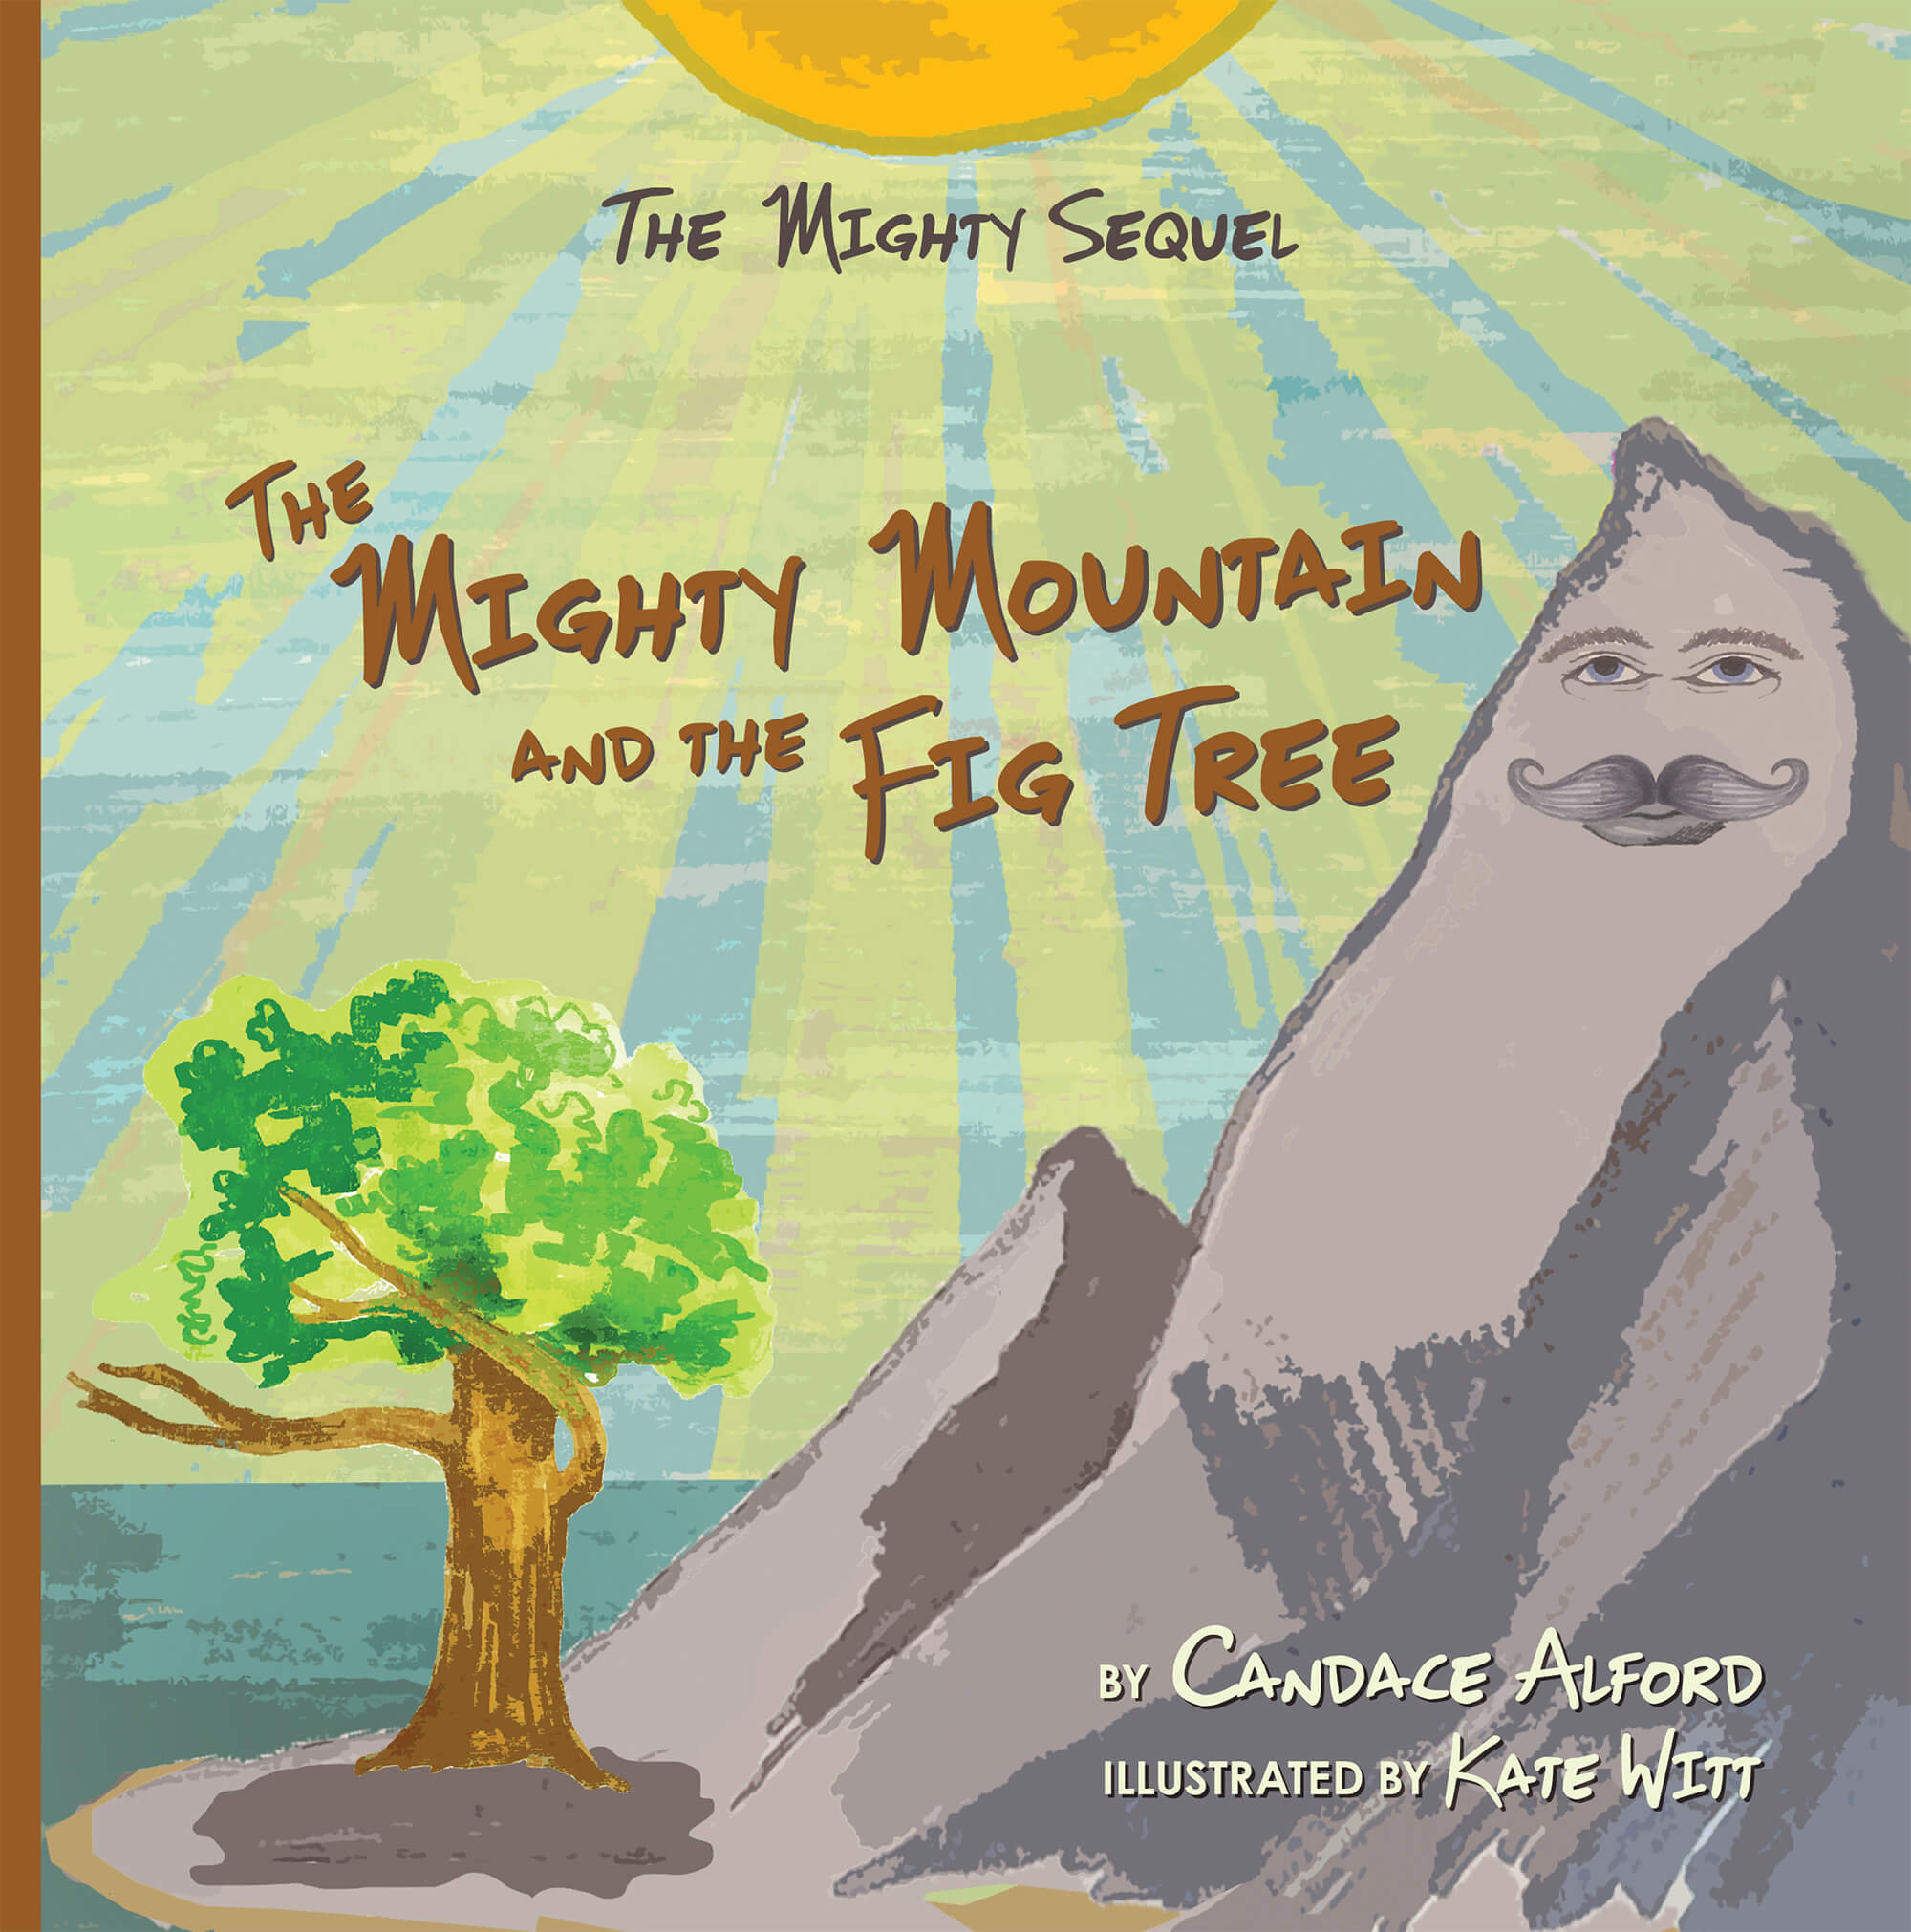 The Mighty Sequel: The Mighty Mountain and the Fig Tree